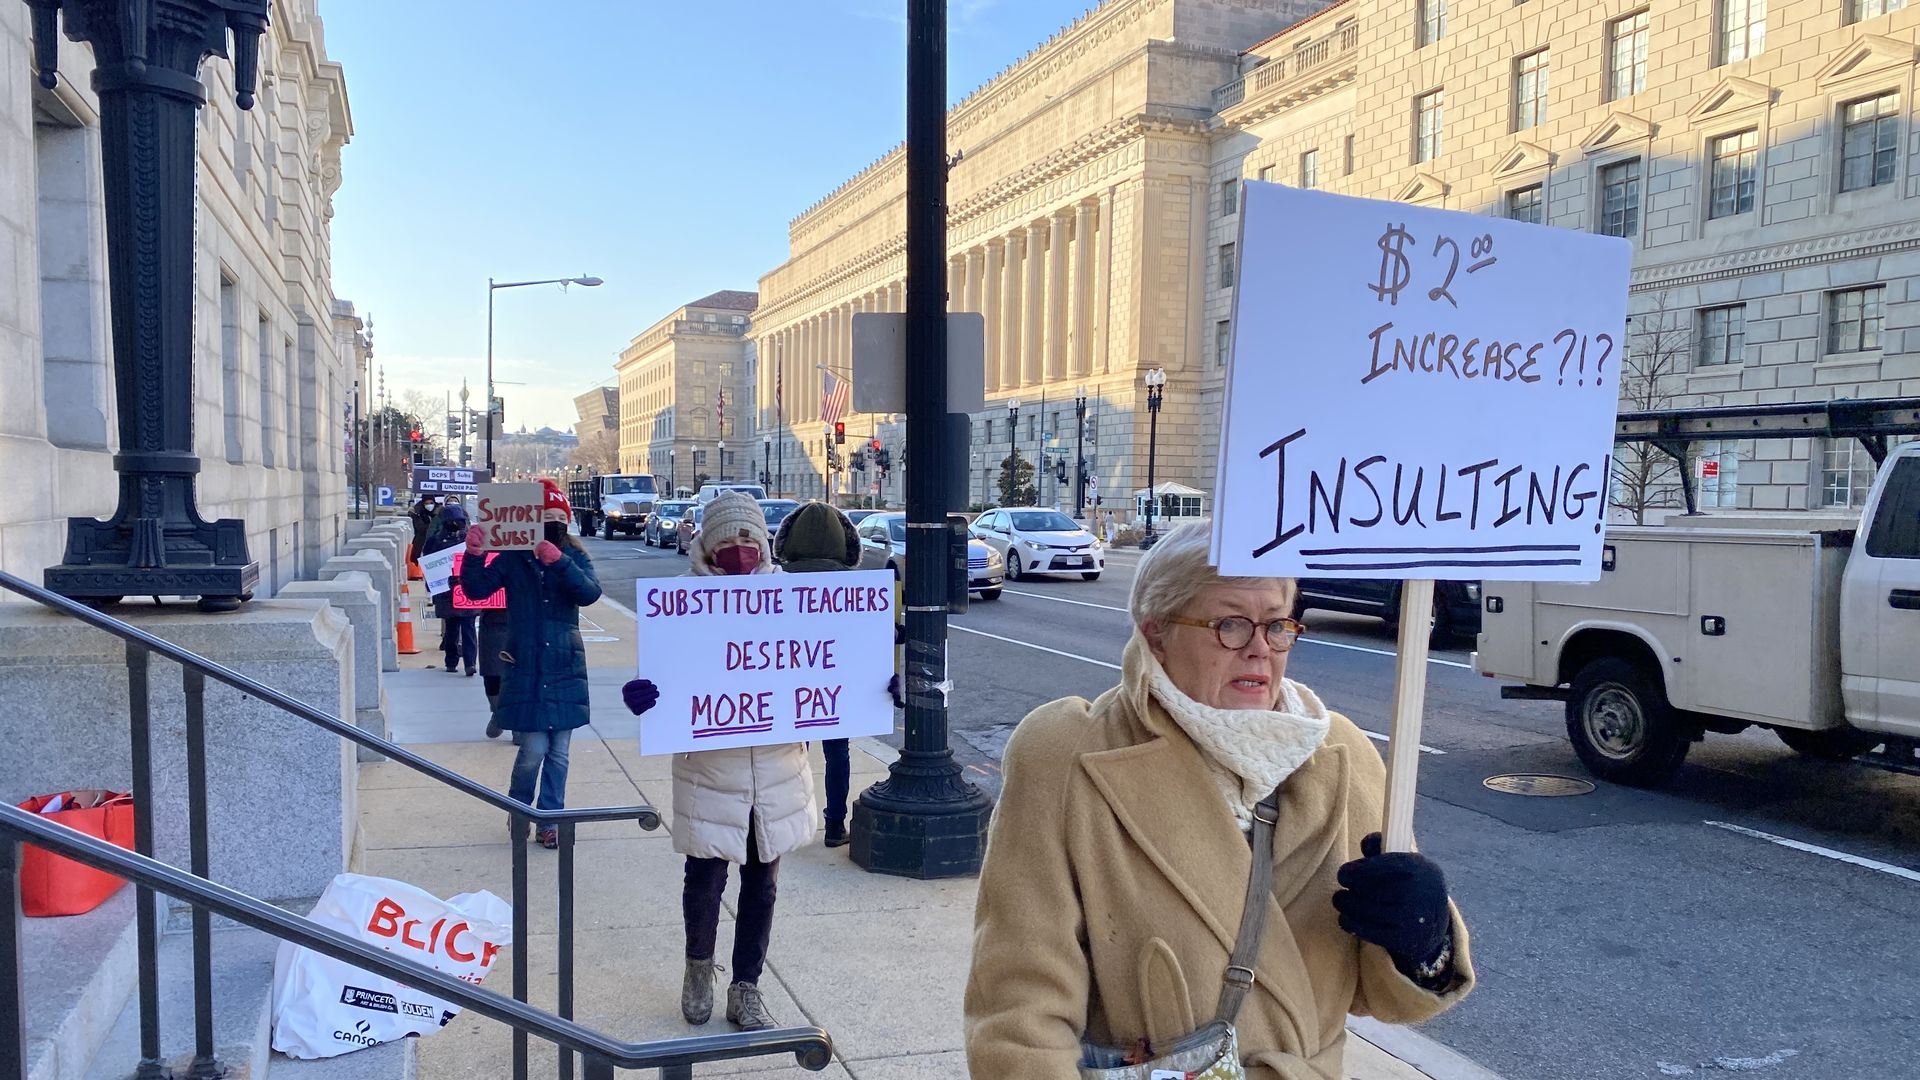 A demonstrator holds a sign that calls for more pay for substitute teachers in D.C.